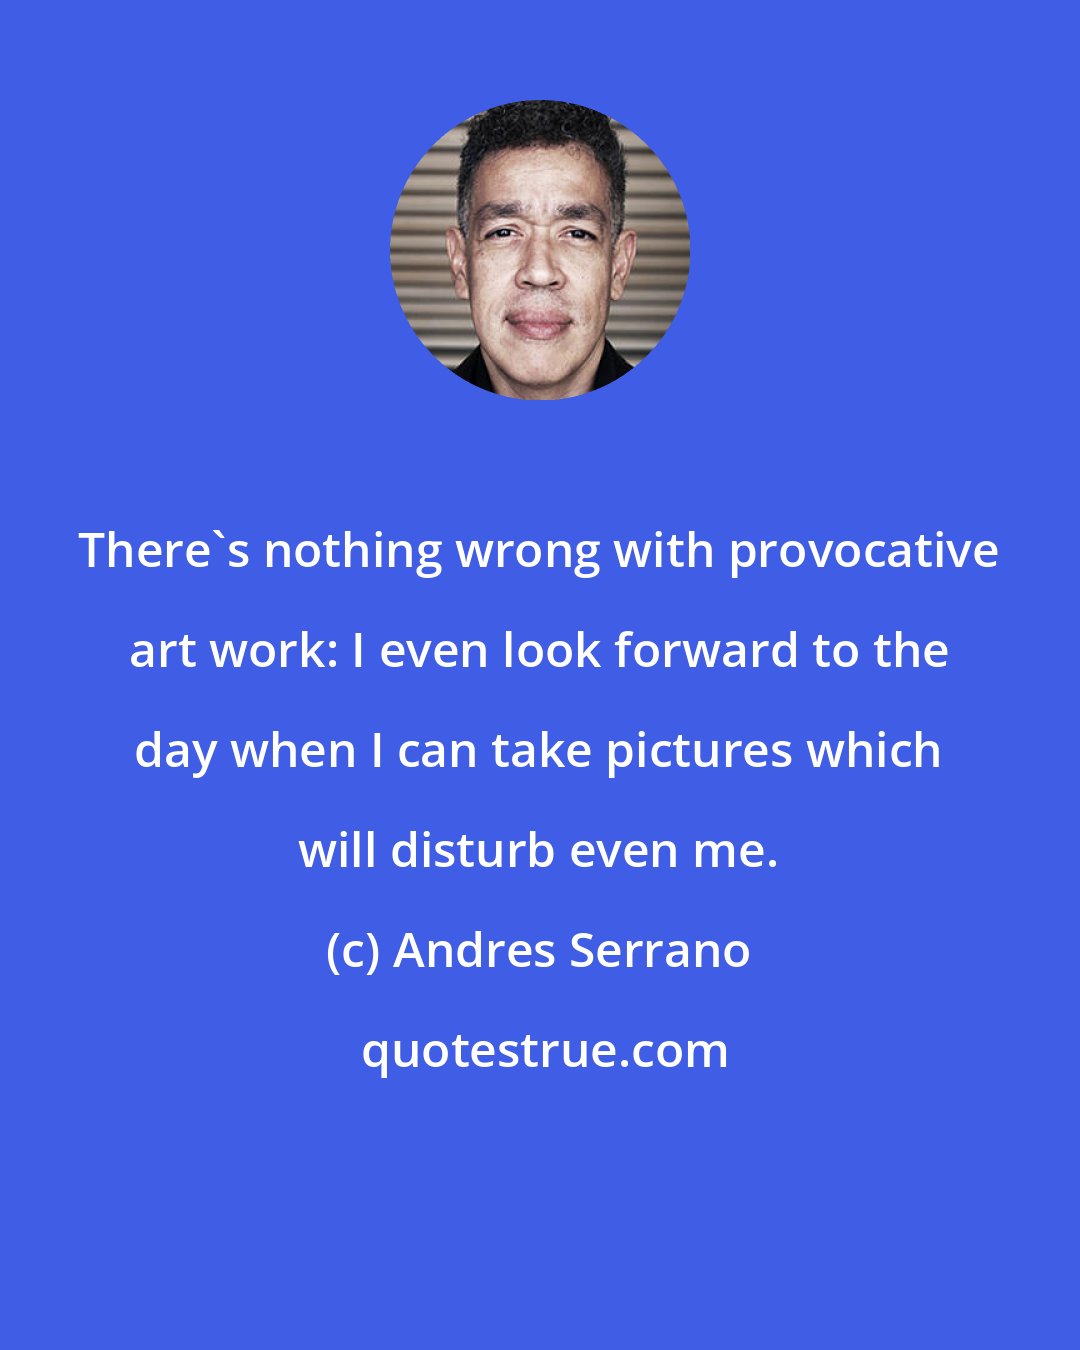 Andres Serrano: There's nothing wrong with provocative art work: I even look forward to the day when I can take pictures which will disturb even me.